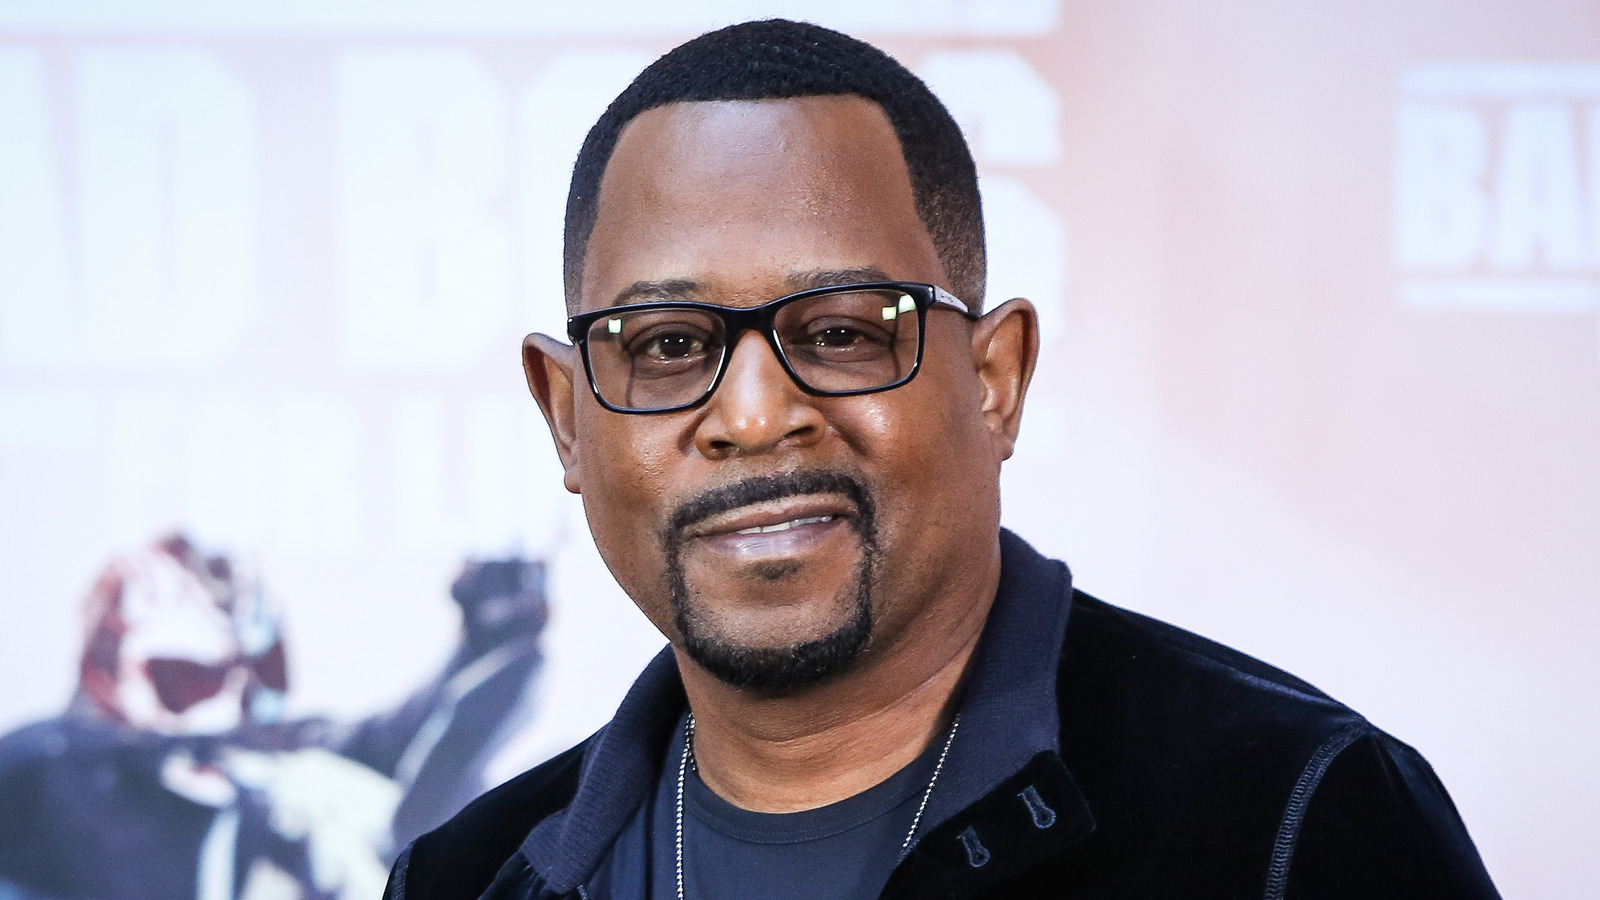 The Serious Health Scare That Nearly Cost Martin Lawrence His Life